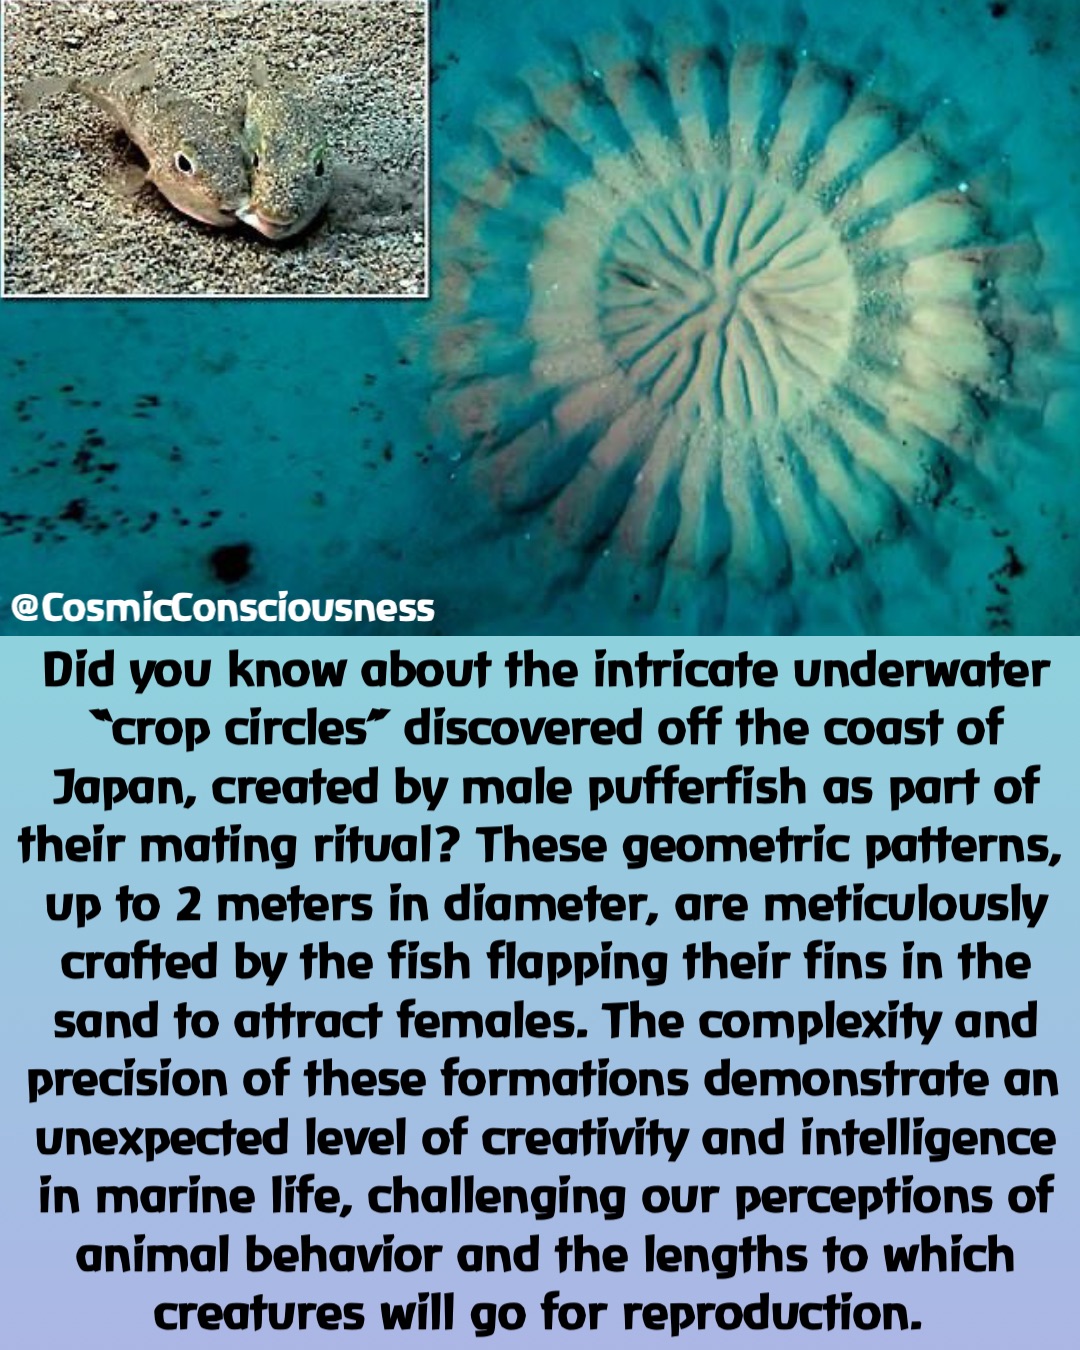 Did you know about the intricate underwater “crop circles” discovered off the coast of Japan, created by male pufferfish as part of their mating ritual? These geometric patterns, up to 2 meters in diameter, are meticulously crafted by the fish flapping their fins in the sand to attract females. The complexity and precision of these formations demonstrate an unexpected level of creativity and intelligence in marine life, challenging our perceptions of animal behavior and the lengths to which creatures will go for reproduction. @CosmicConsciousness